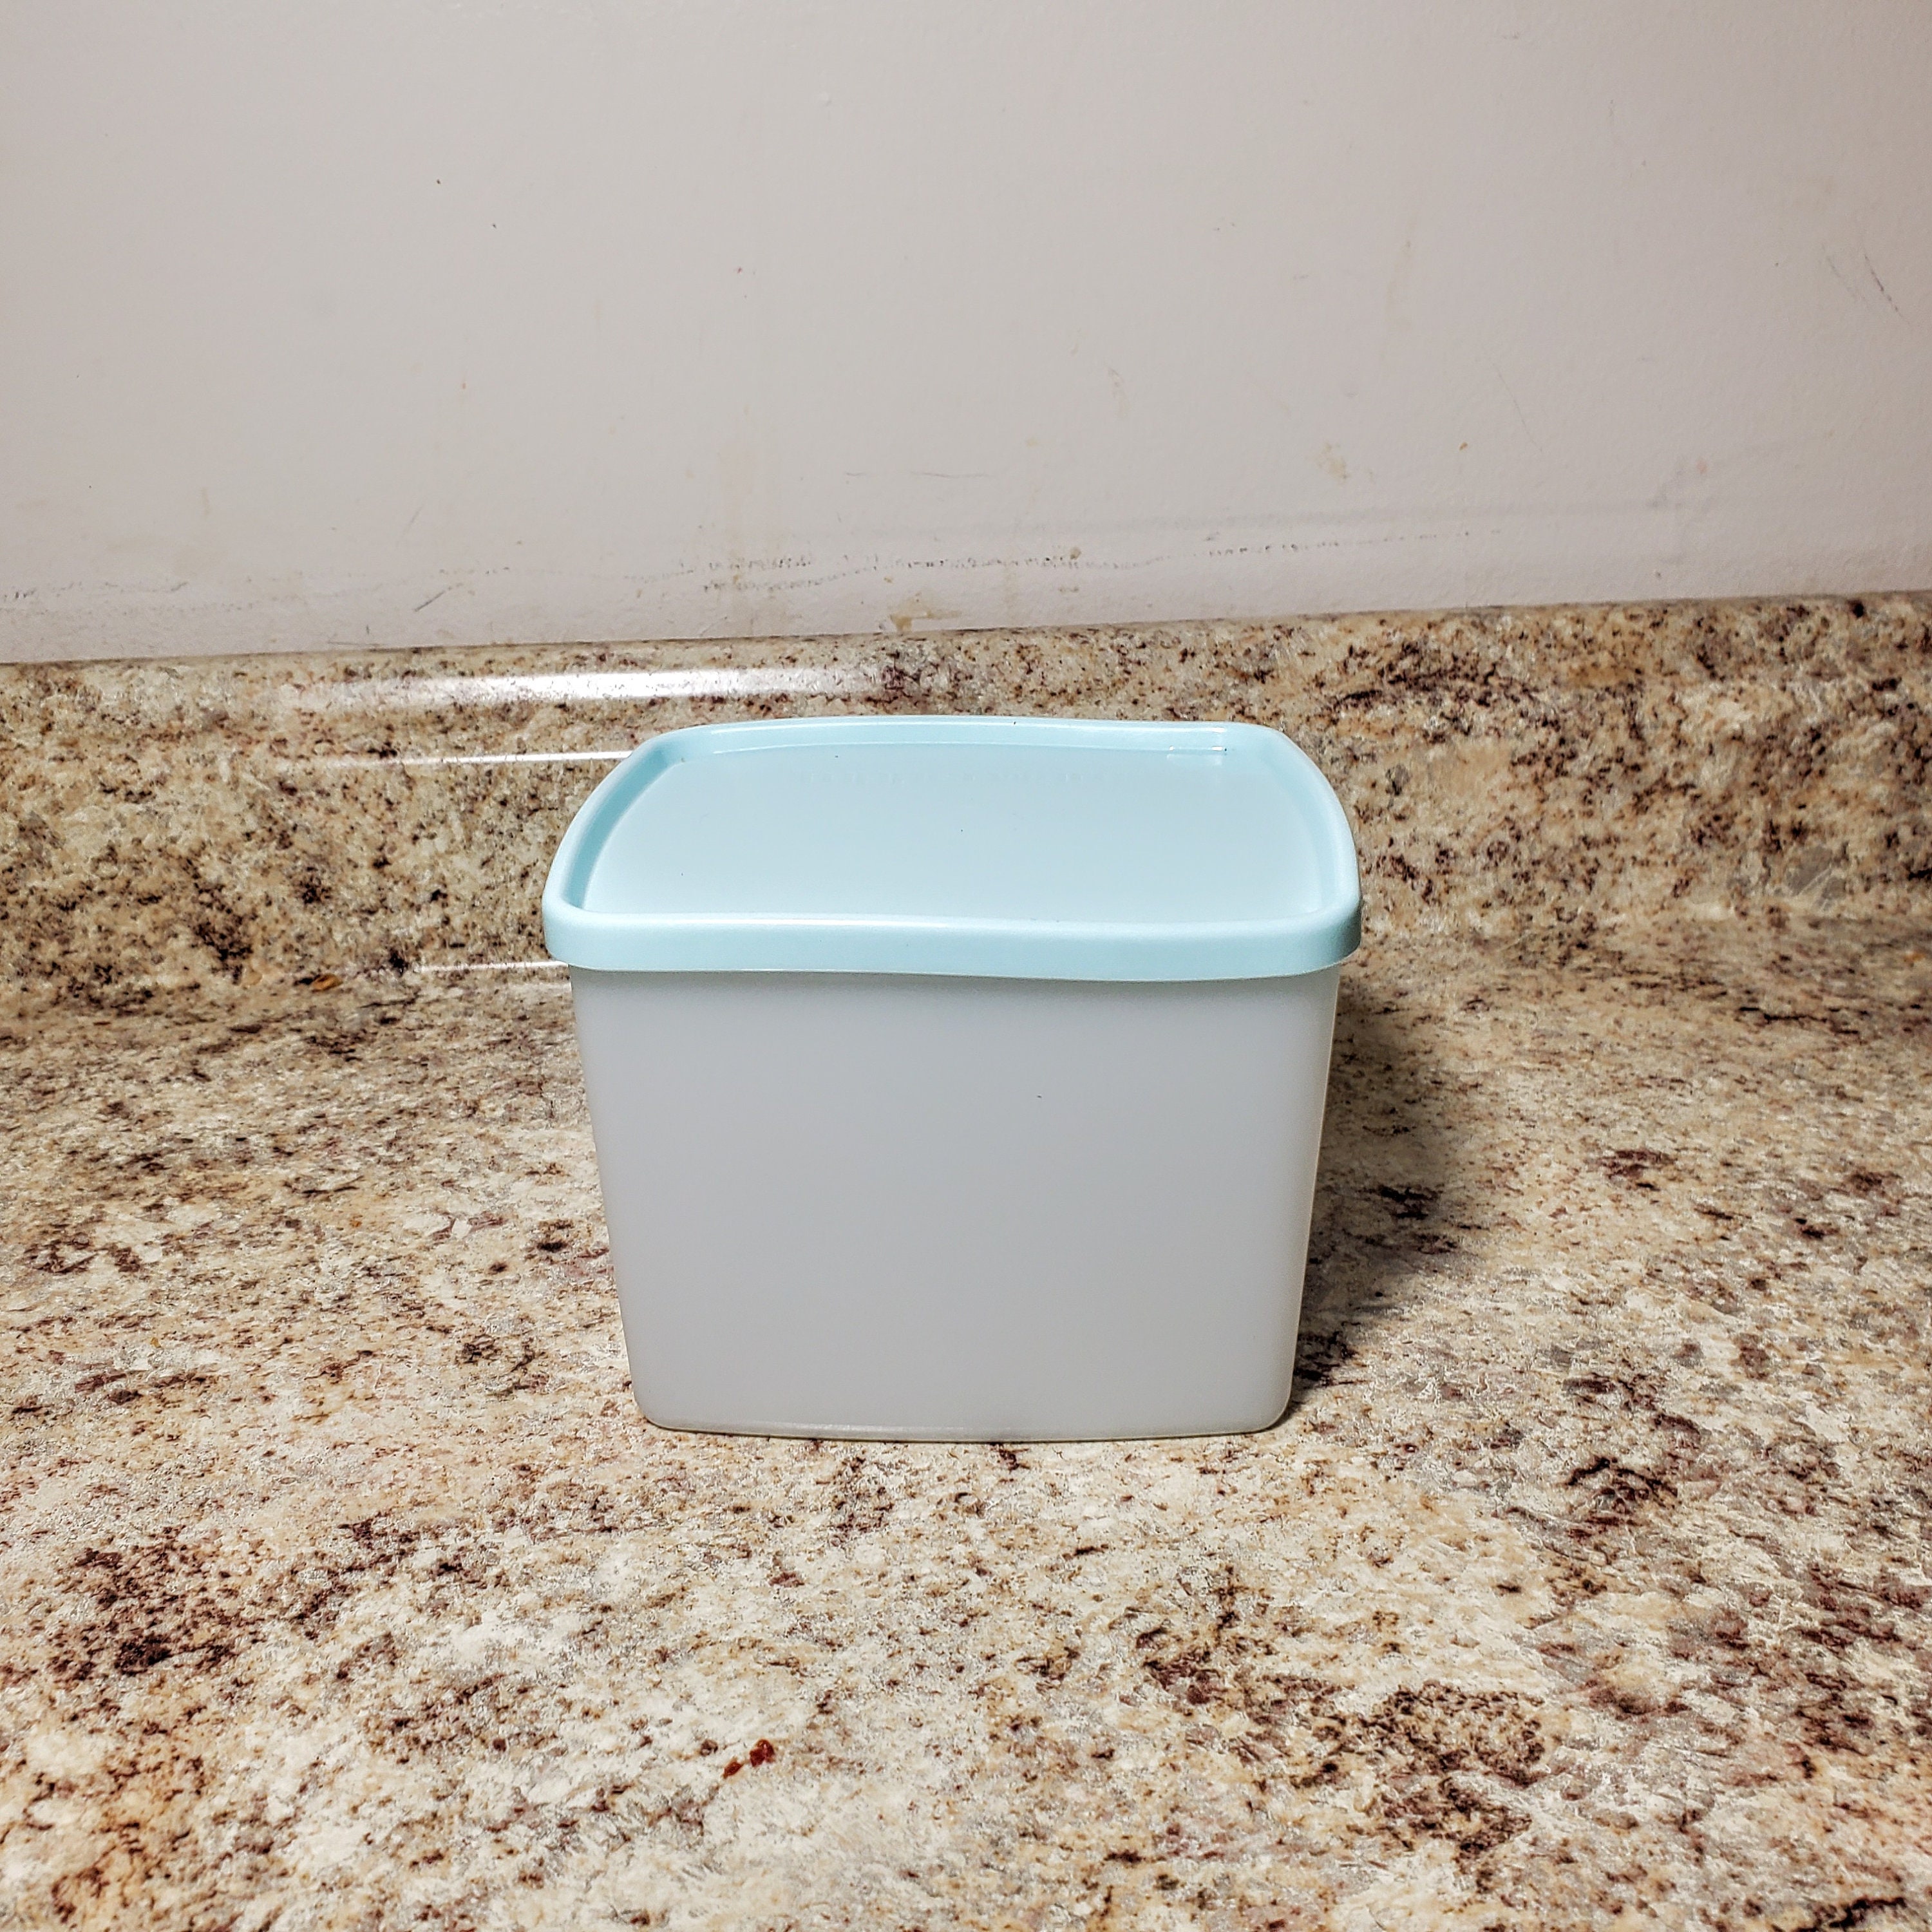 Tupperware Square Round Containers reviews in Kitchen & Dining Wares -  ChickAdvisor